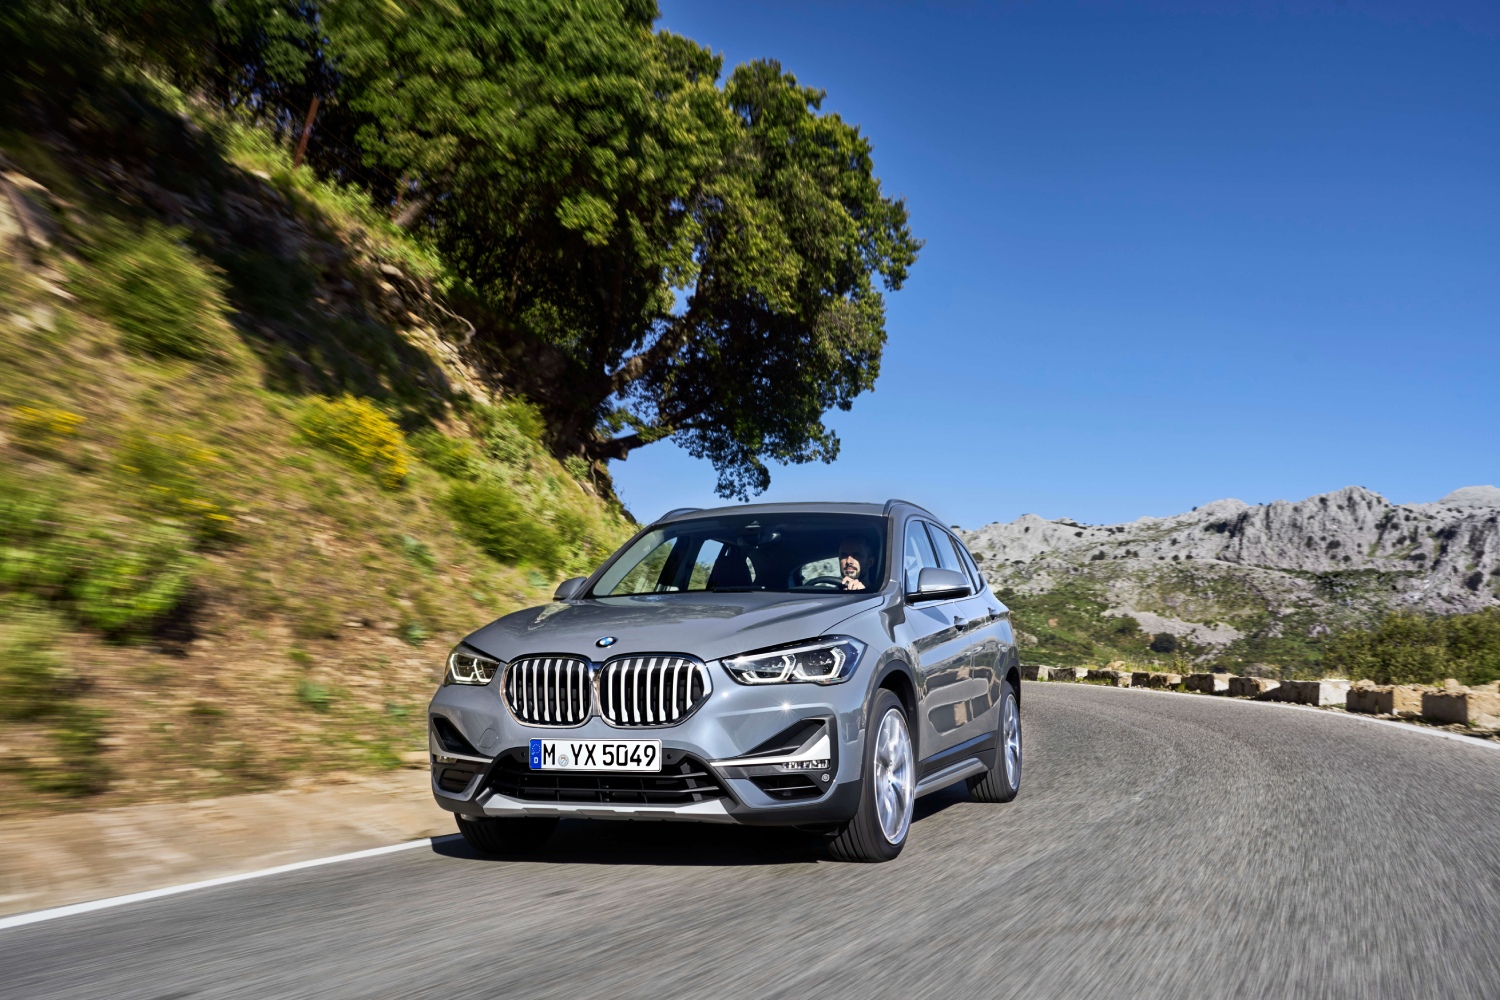 The best used BMW SUVs include this 2019 X1